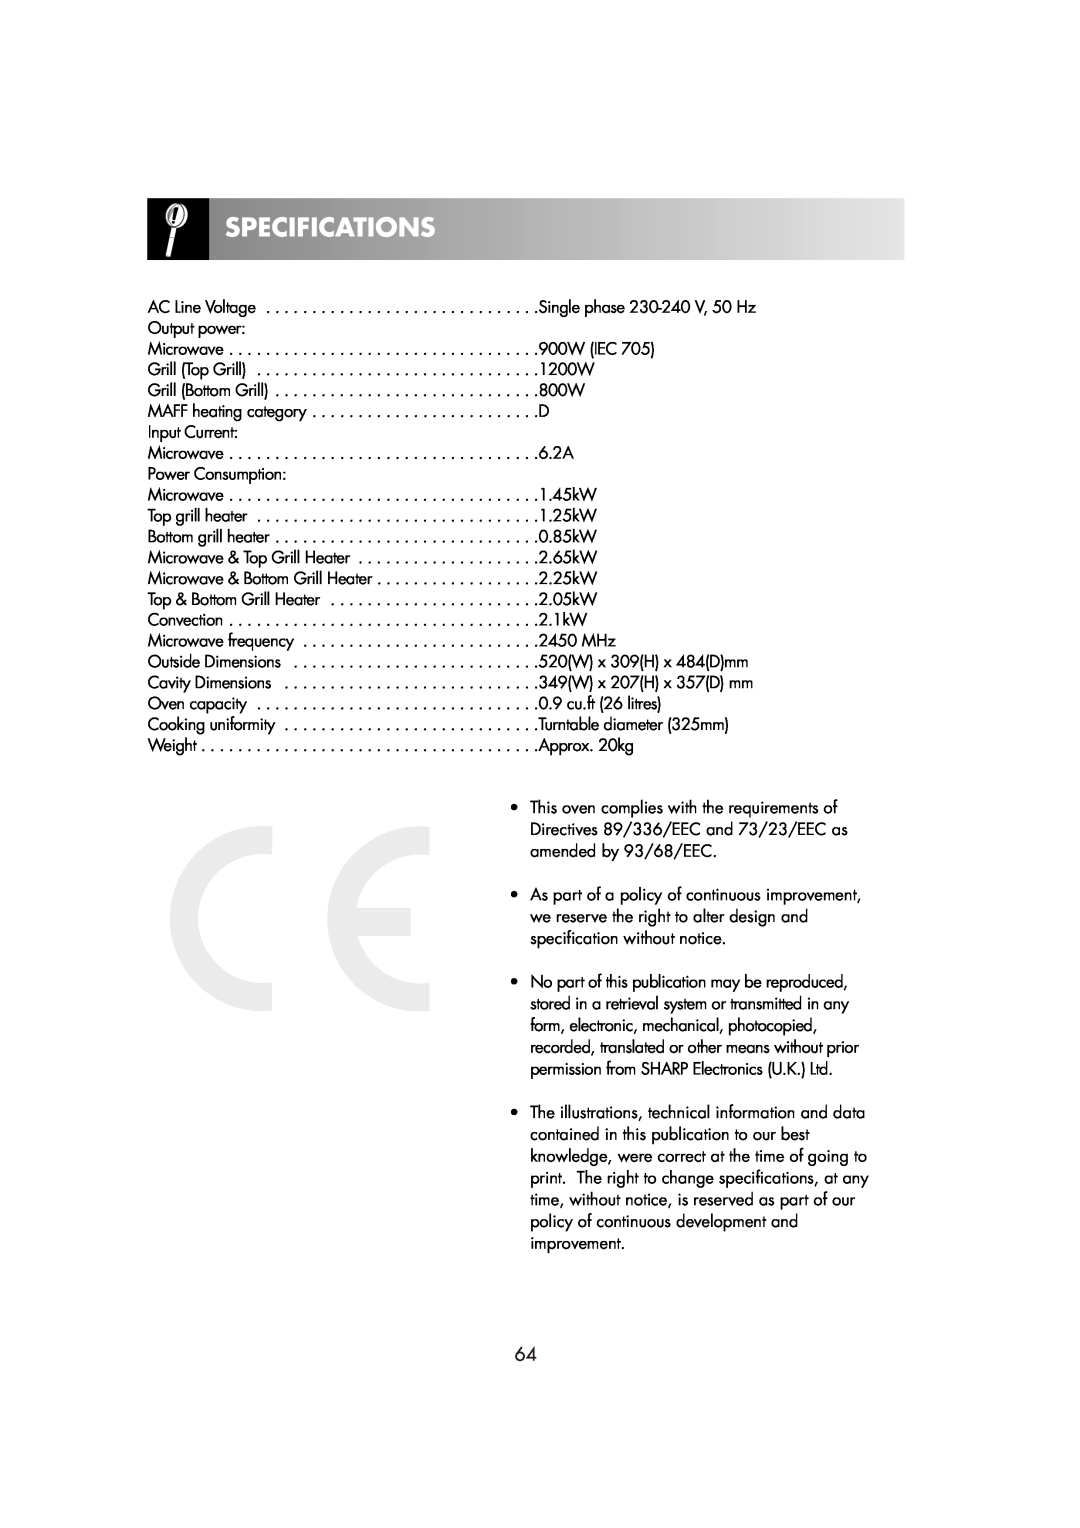 Sharp R-82STM manual Specifications, As part of a policy of continuous improvement 